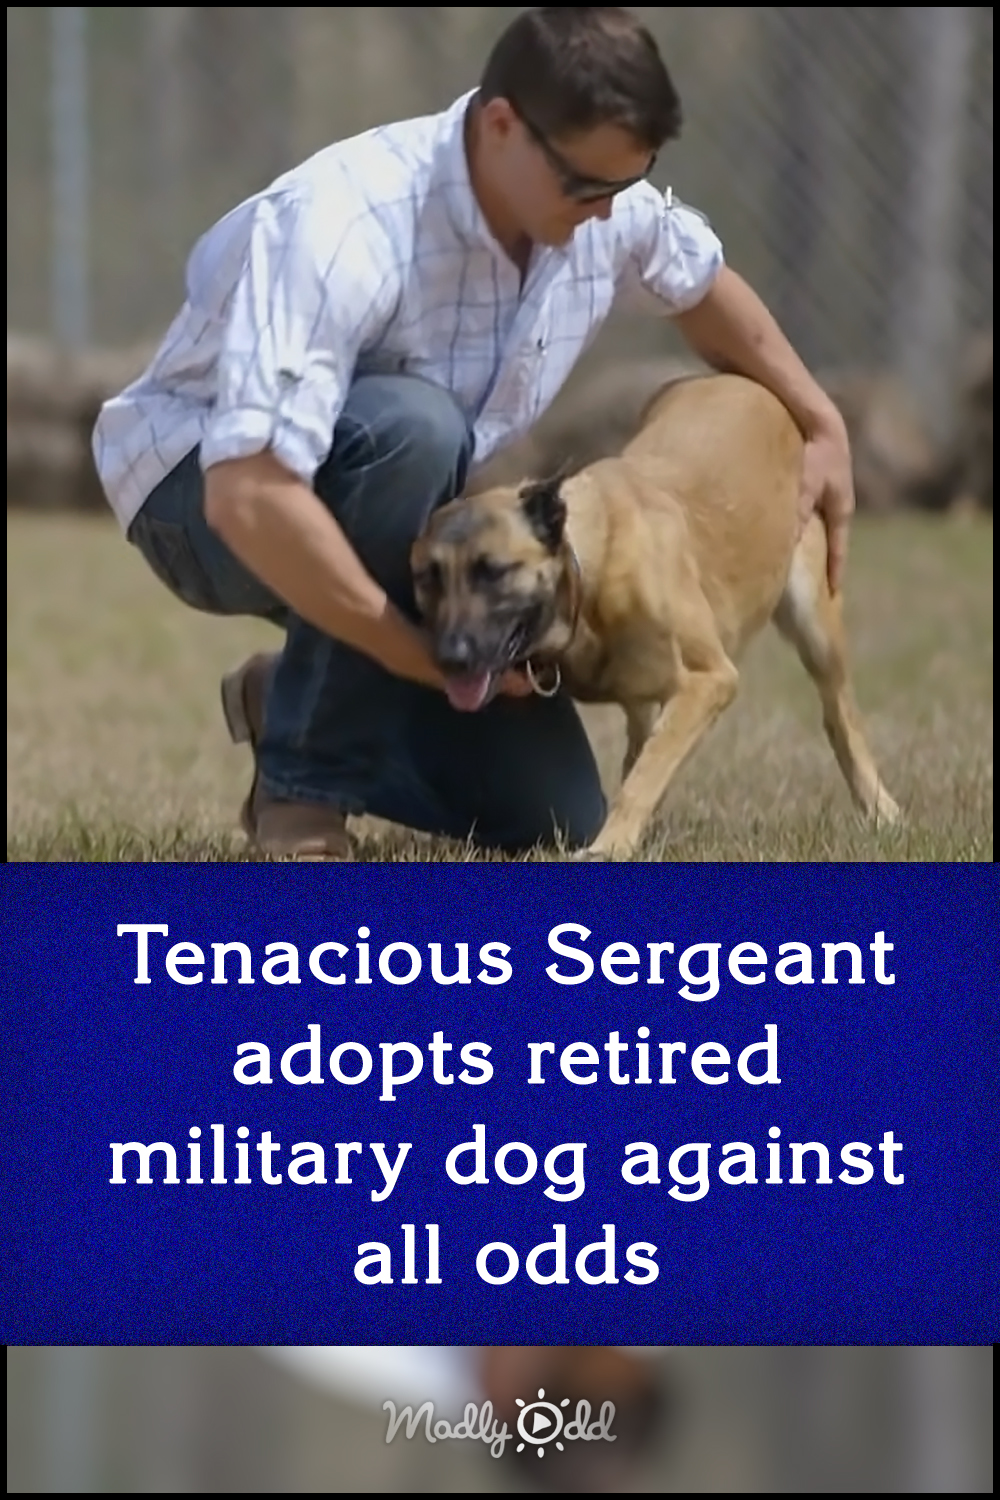 Tenacious Sergeant adopts retired military dog against all odds